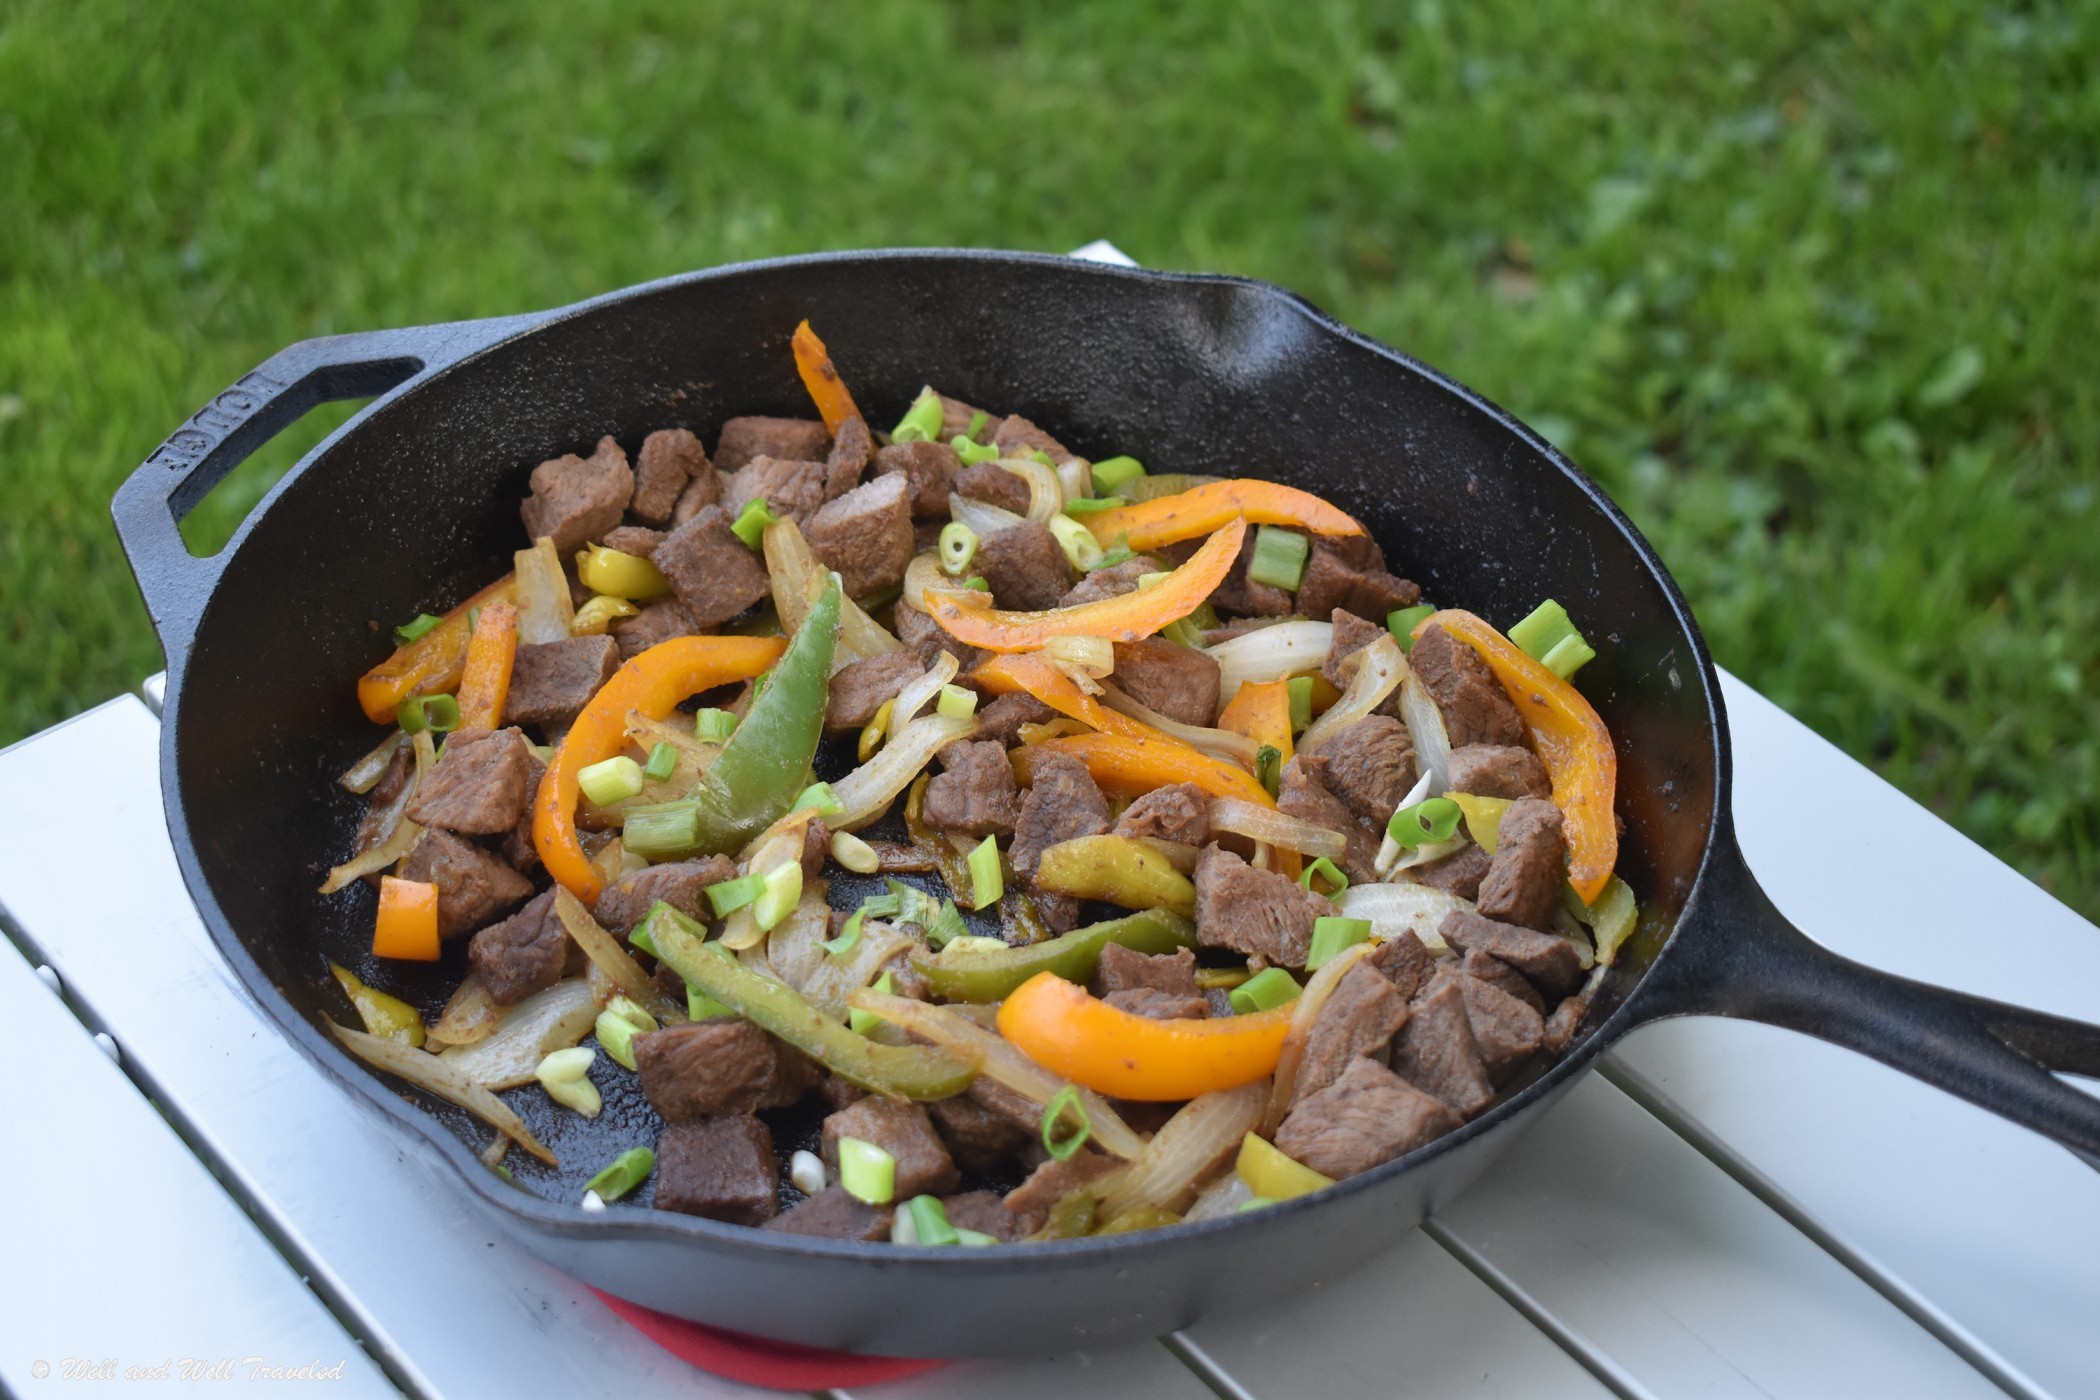 Rent a skillet for camping